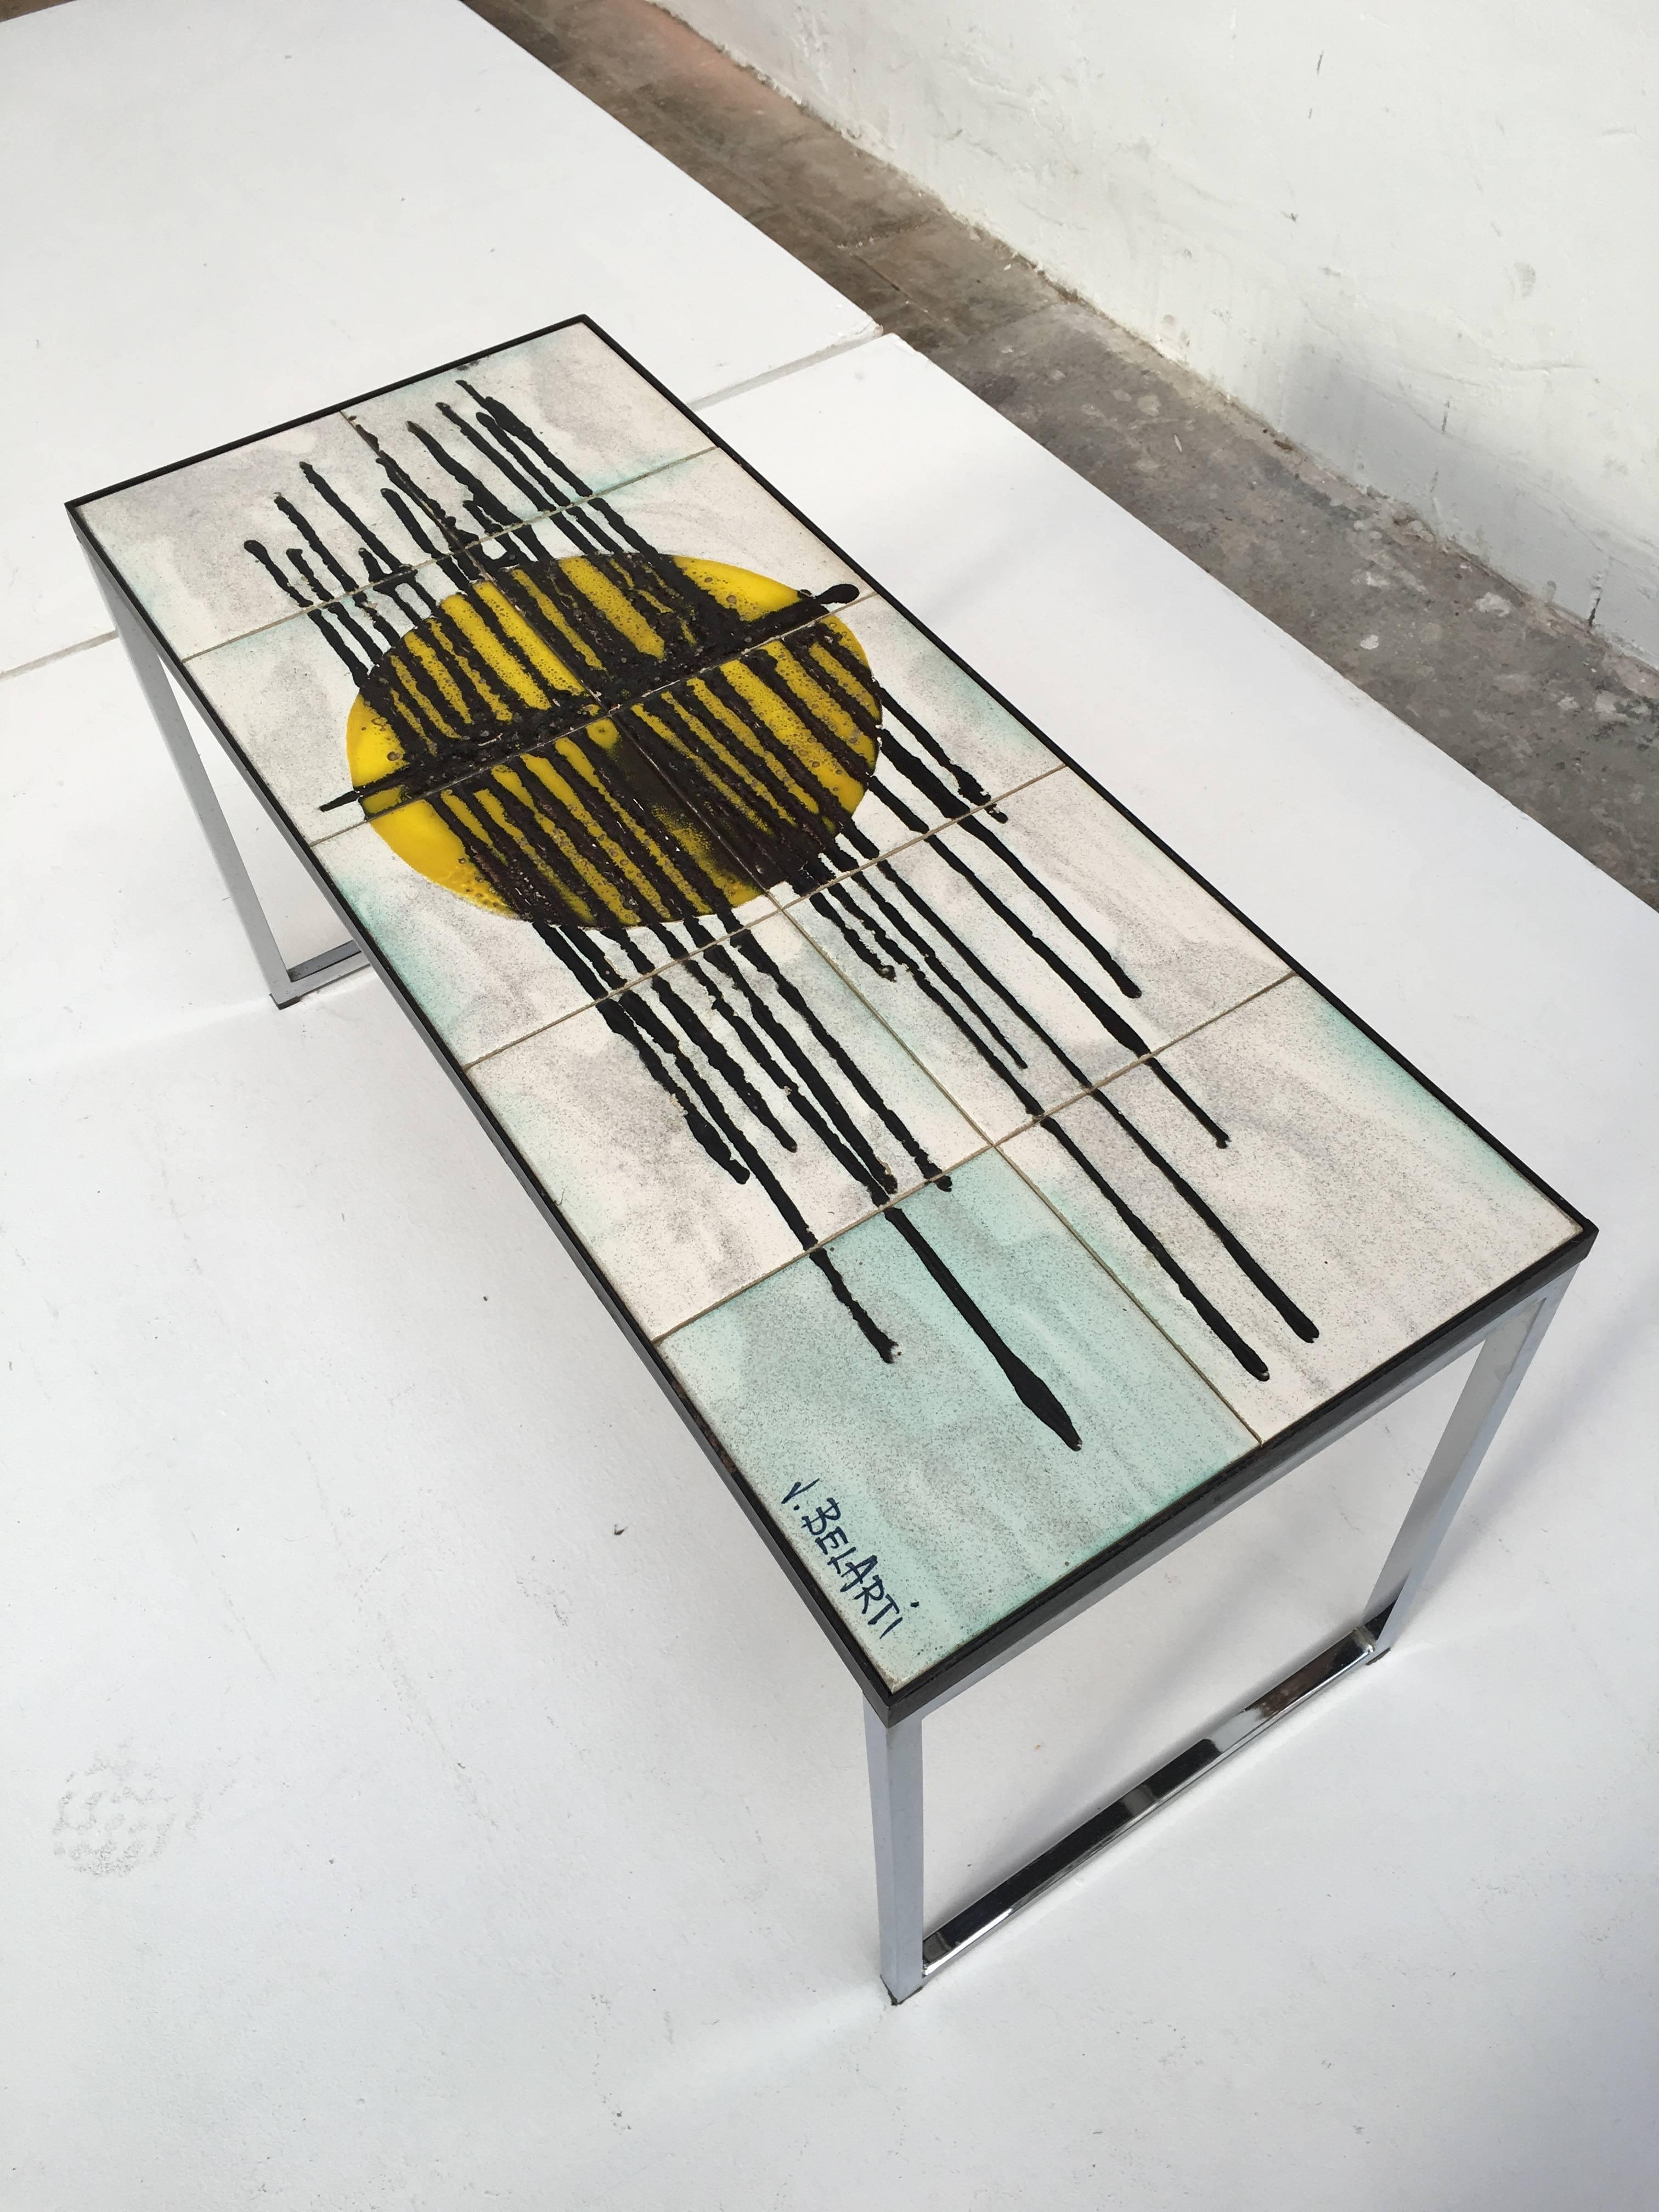 Signed Juliette Belarti abstract ceramic side/coffee table 

This small gem will be a real eye-catcher in your interior with its abstract mid century modern black, yellow and  cyan blue handpainted ceramic tile top

